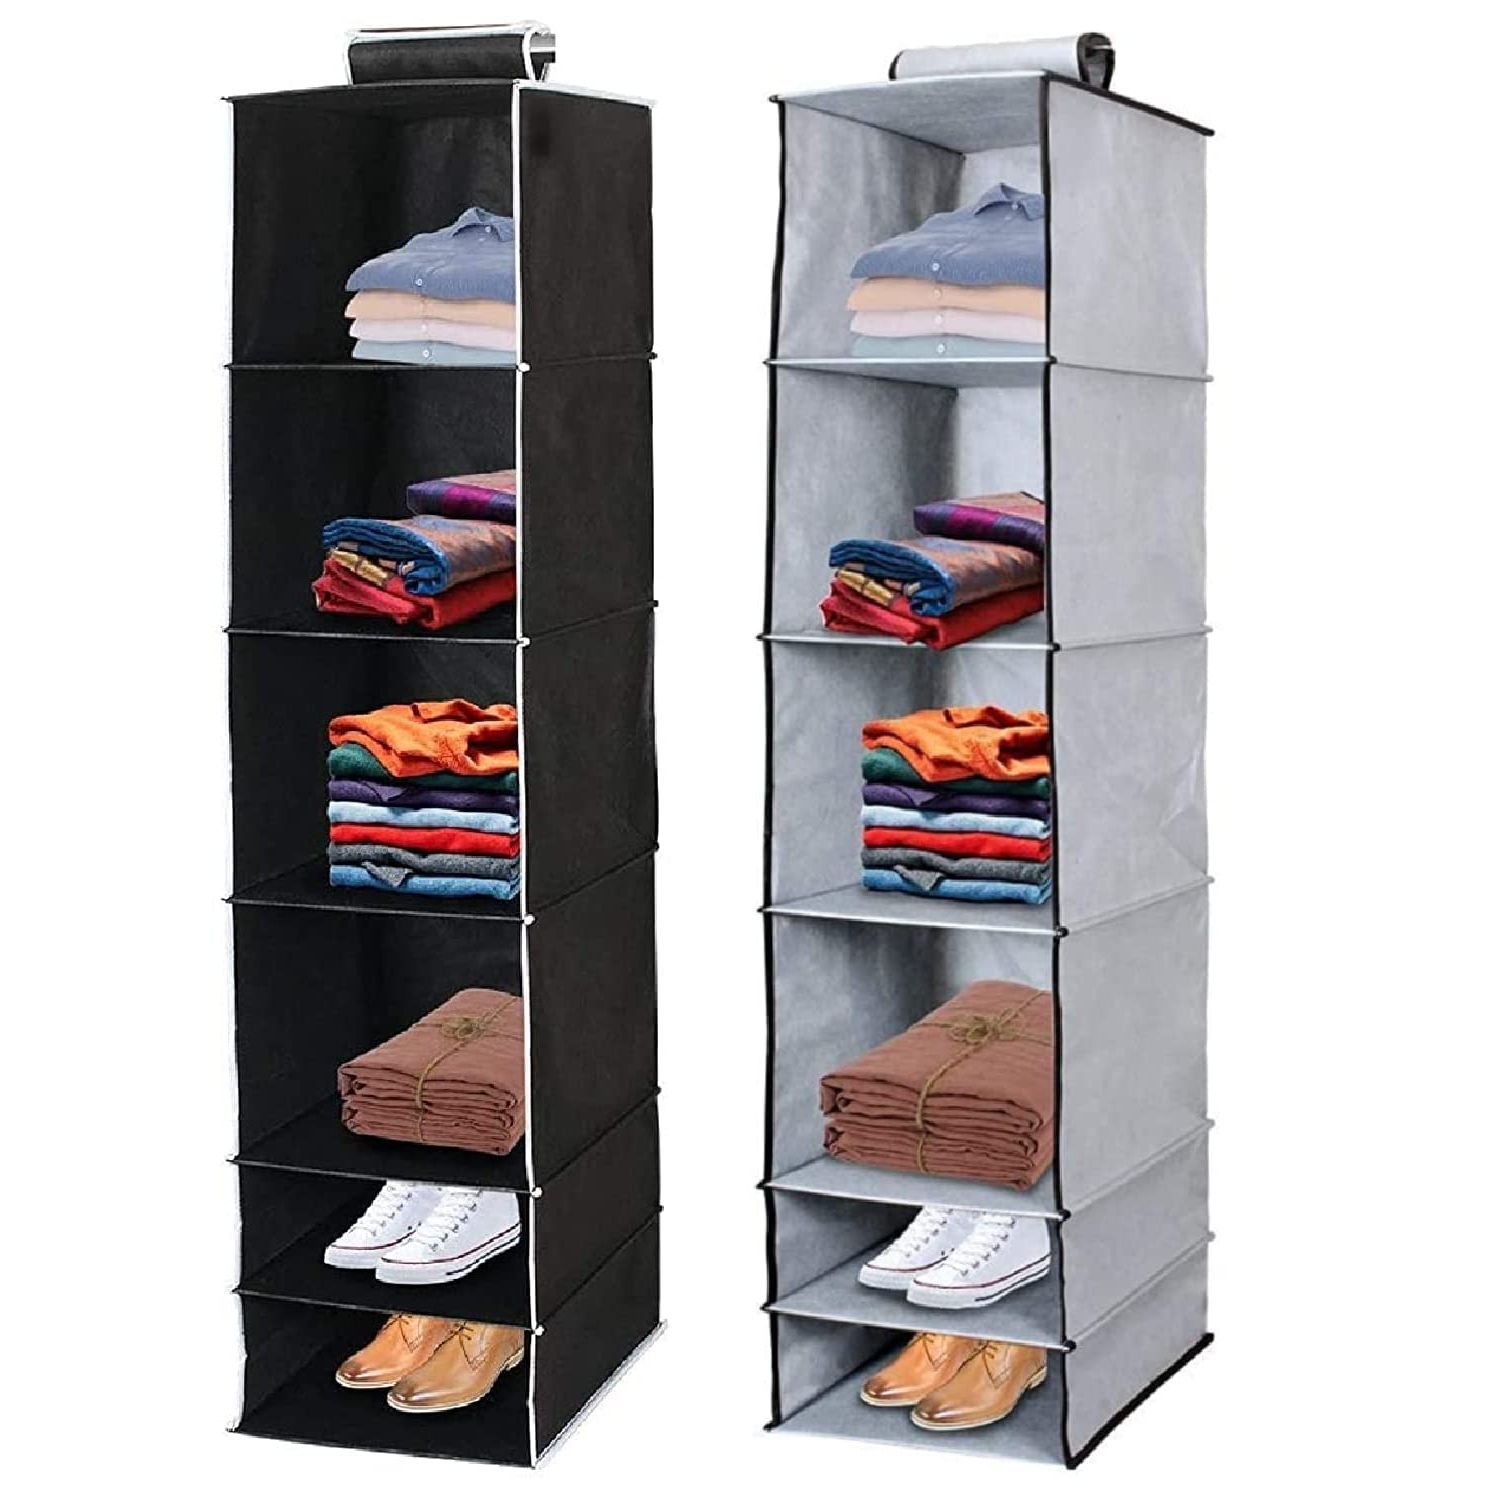 Most Up To Date 6 Shelf Wardrobes In Shubhkraft 6 Shelf/compartment Closet Cloth Hanging Organizer/clothes  Storage Wardrobe Organiser For Almirah (pack Of 2, Black & Grey) (non Woven  Fabric With Engineered Wood Inside) : Amazon.in: Home & Kitchen (Photo 3 of 10)